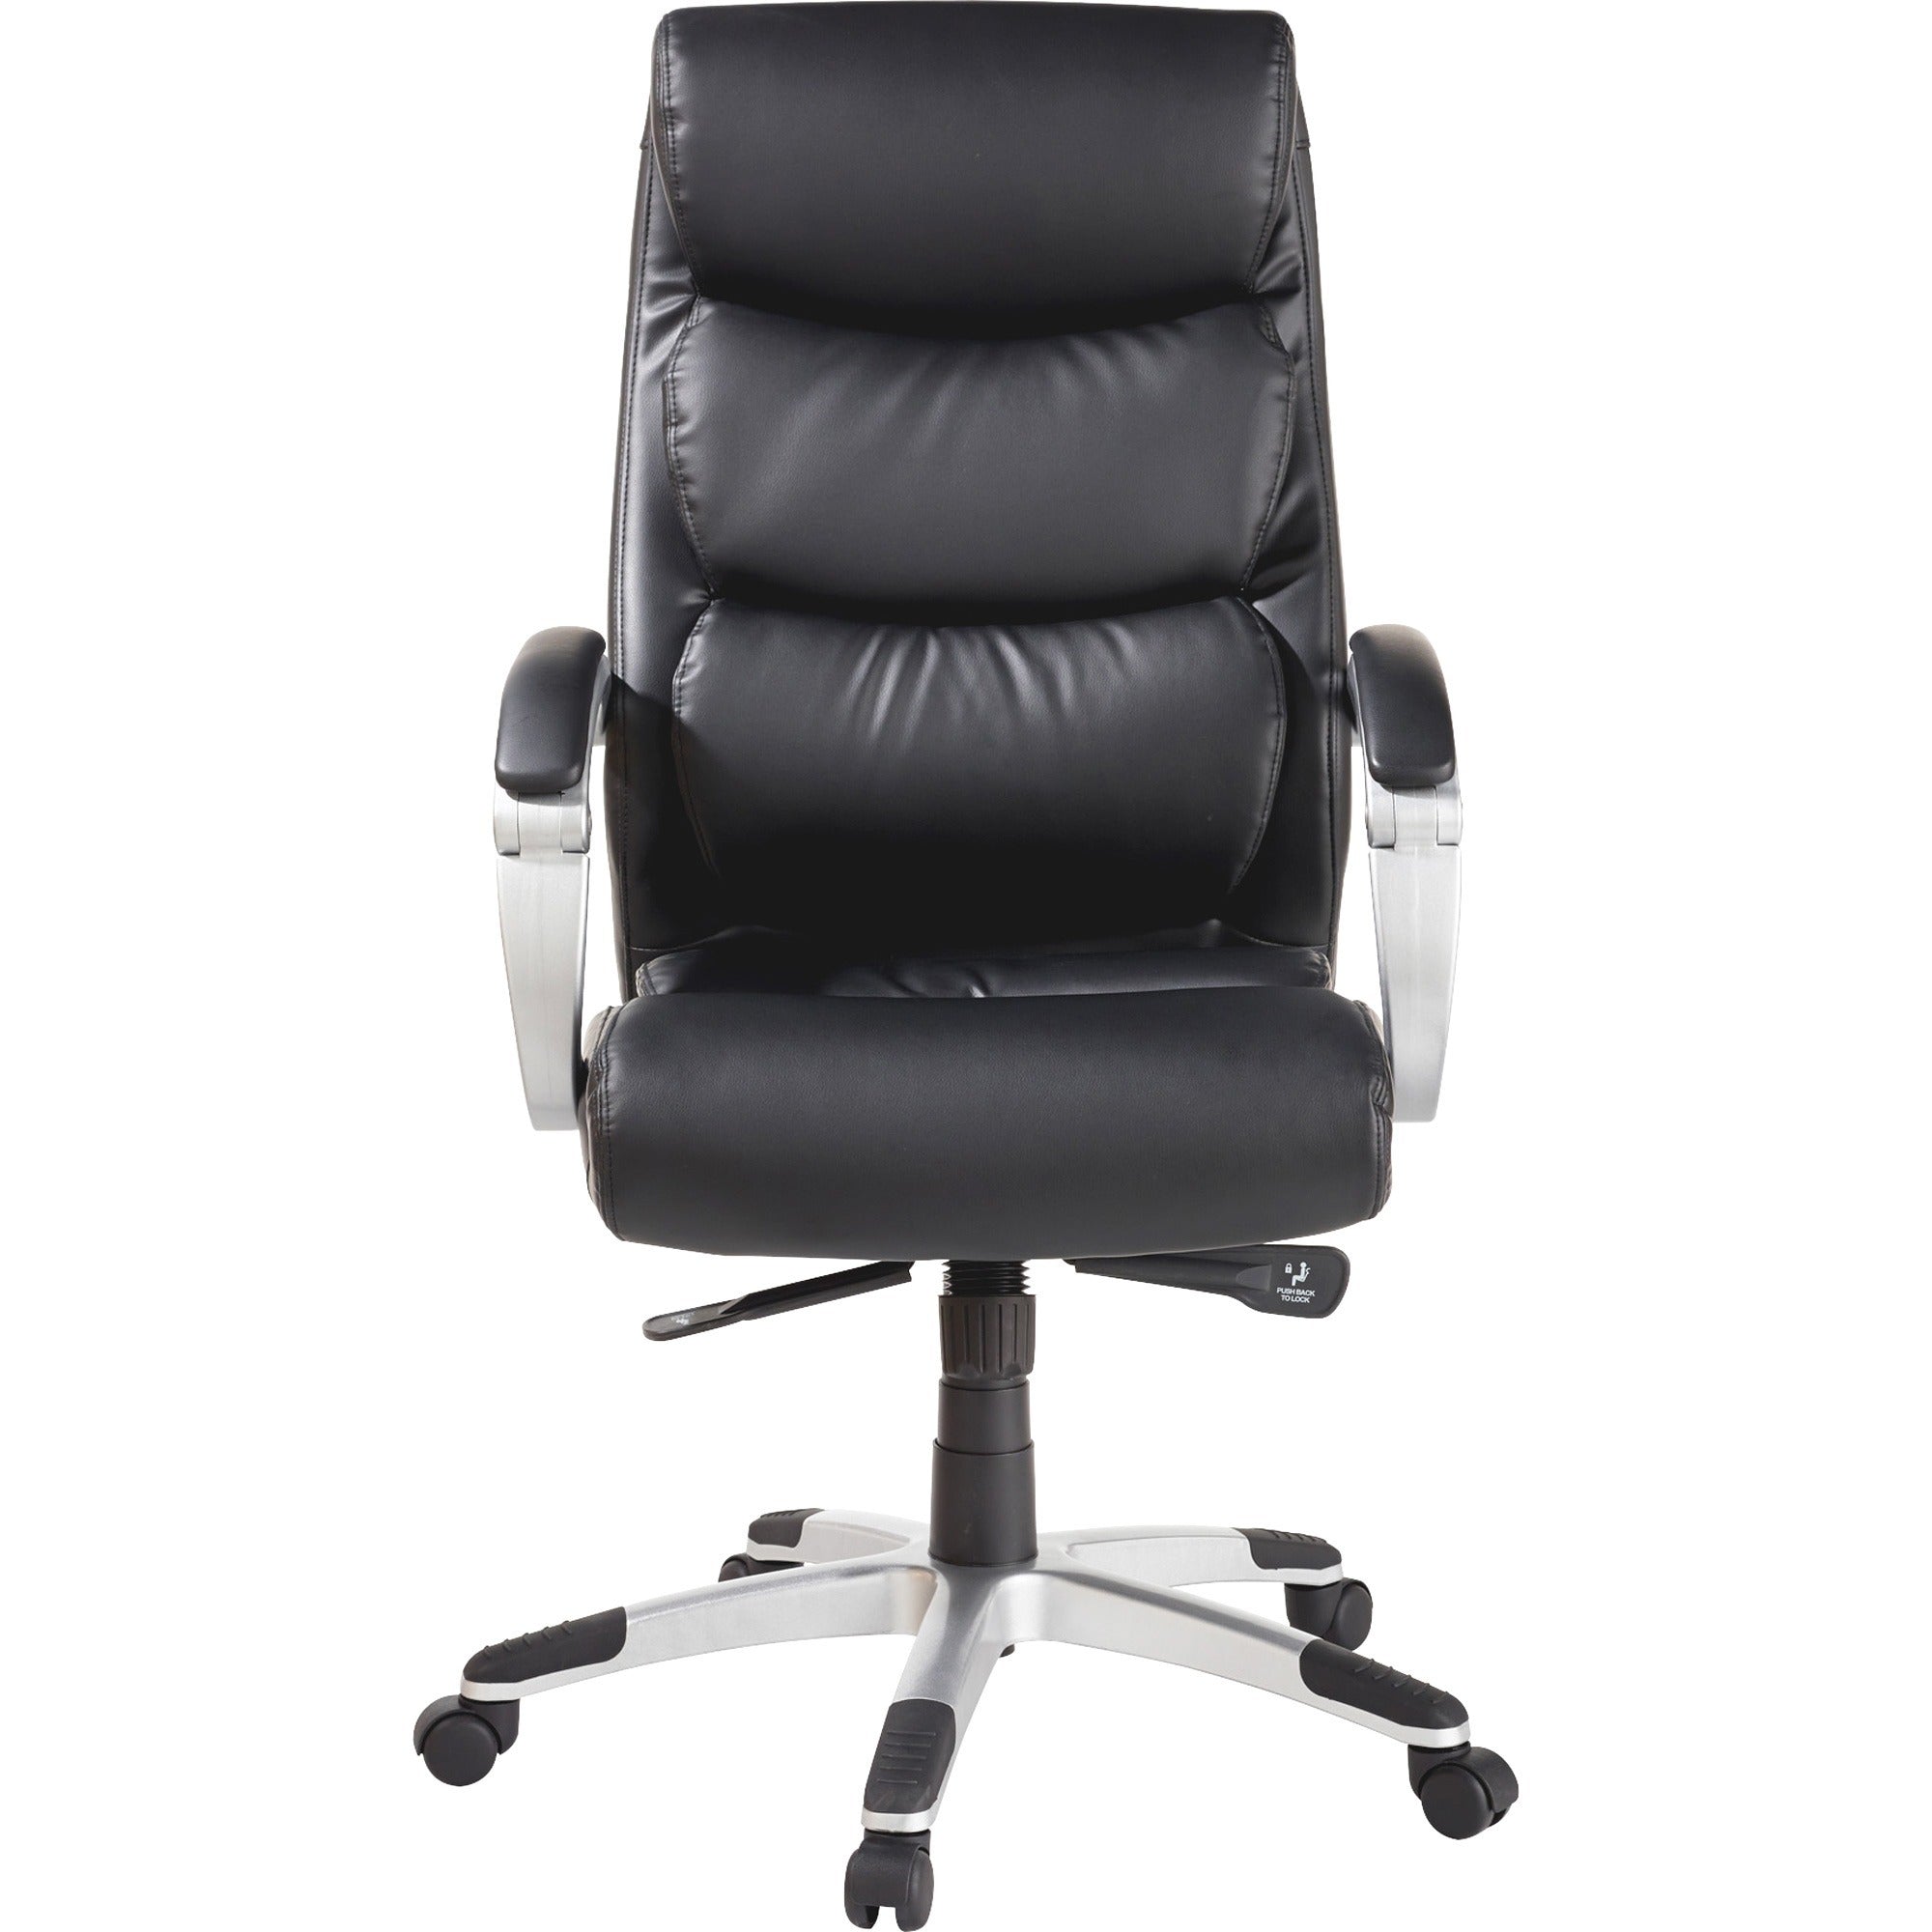 Lorell Executive High-back Chair with Flexing Arms - Powder Coated Frame - 5-star Base - Black, Silver - Bonded Leather - 1 Each - 